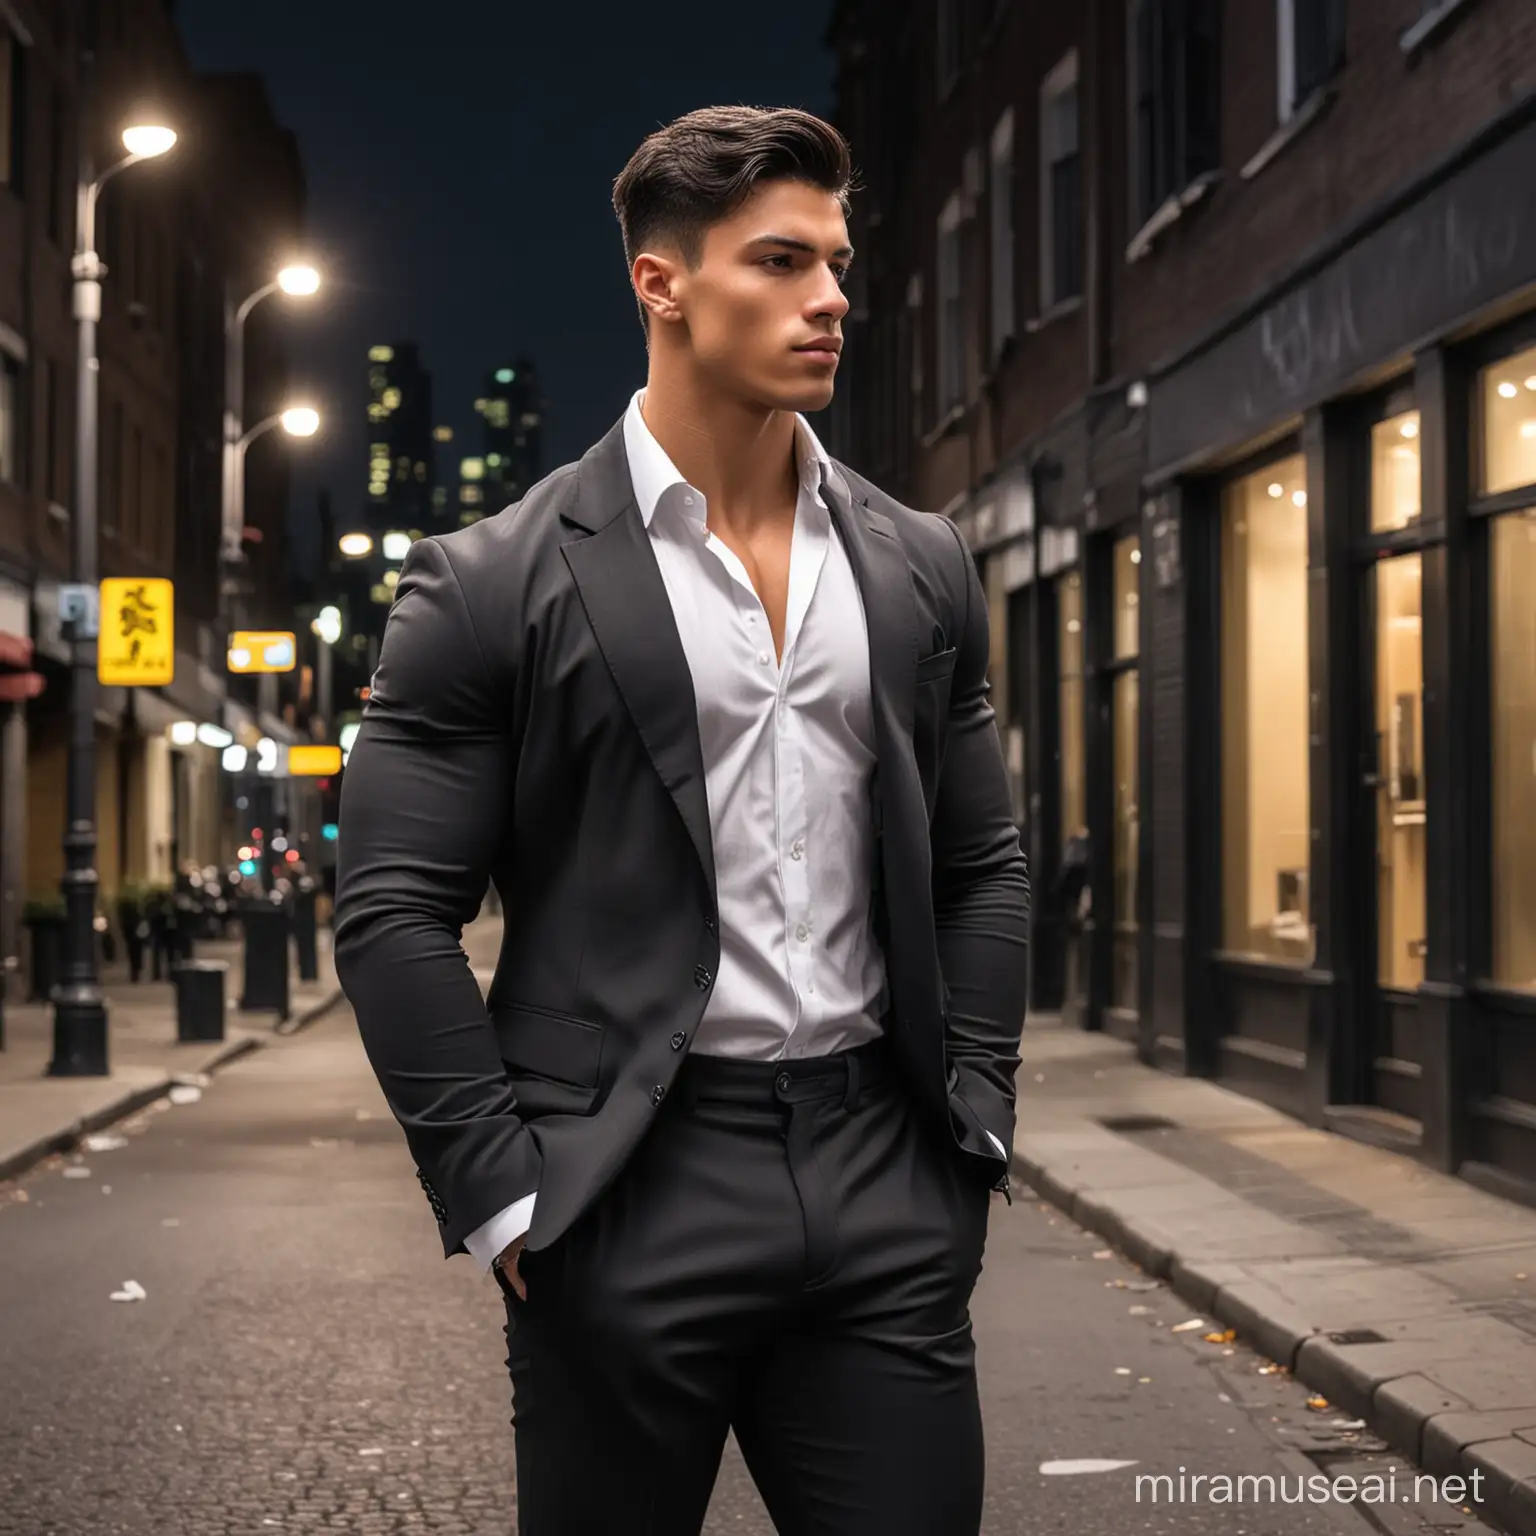 Powerful Male Bodybuilder in Black Suit Standing Outdoors at Night